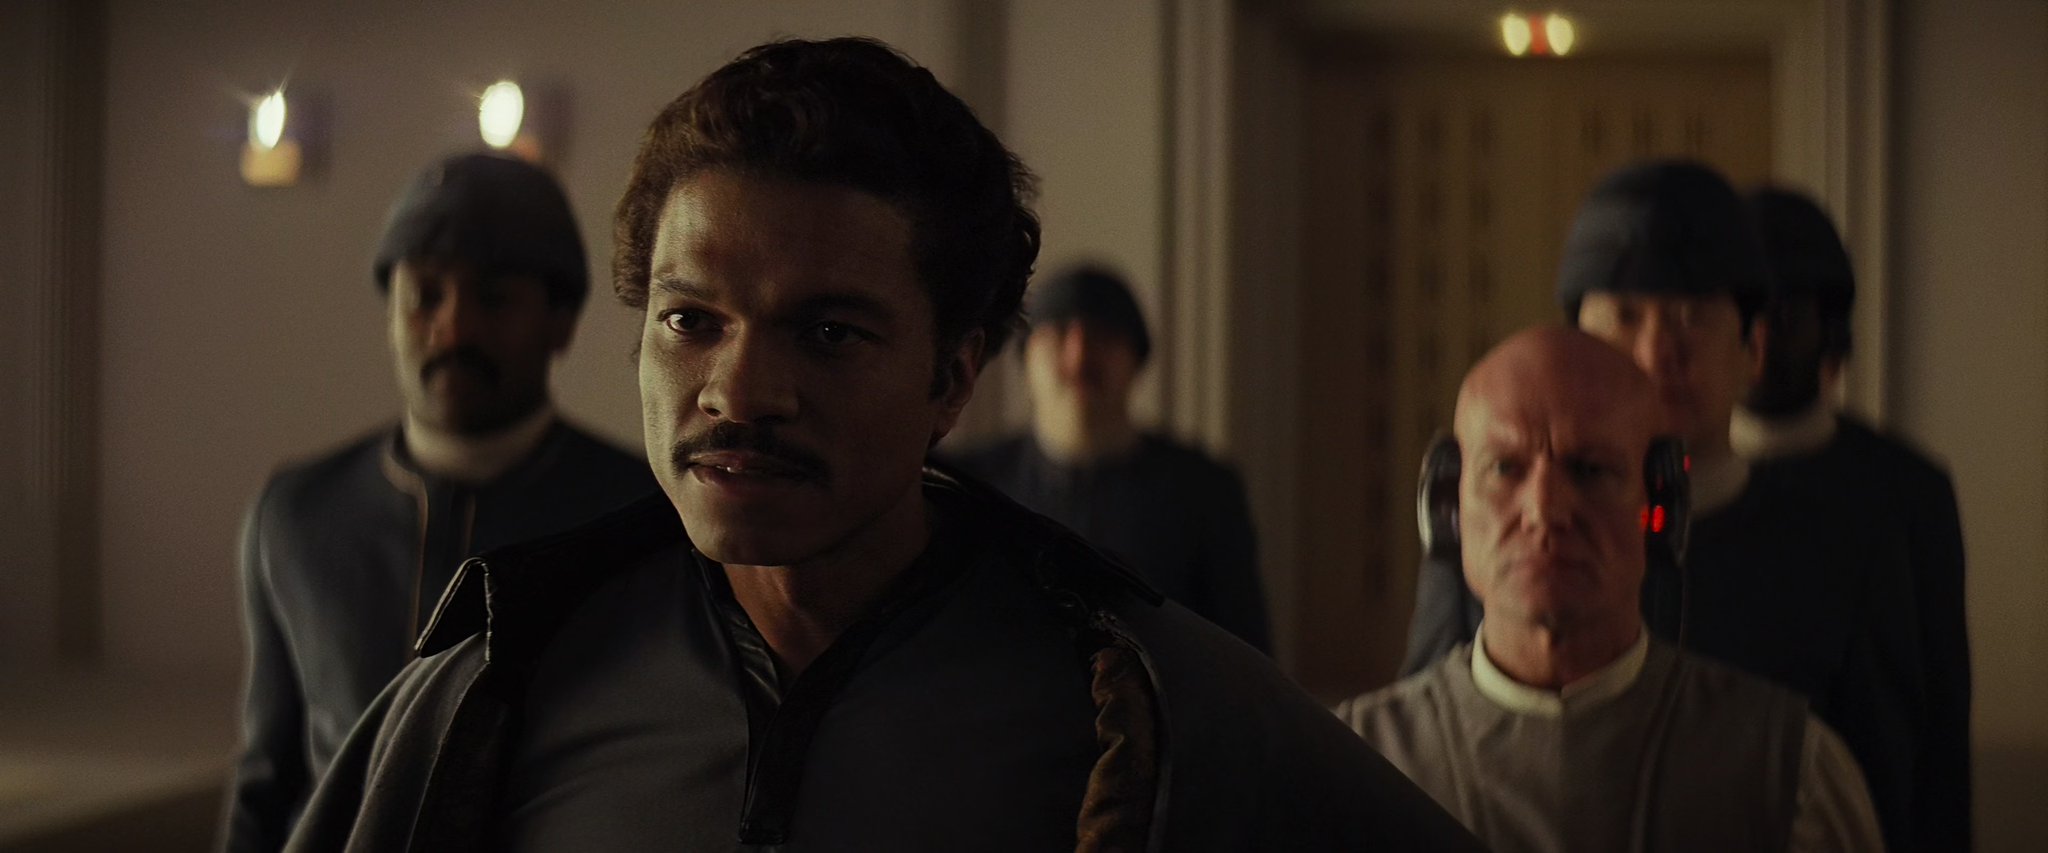 Happy birthday to Billy Dee Williams who played Lando Calrissian in the Star Wars franchise! 